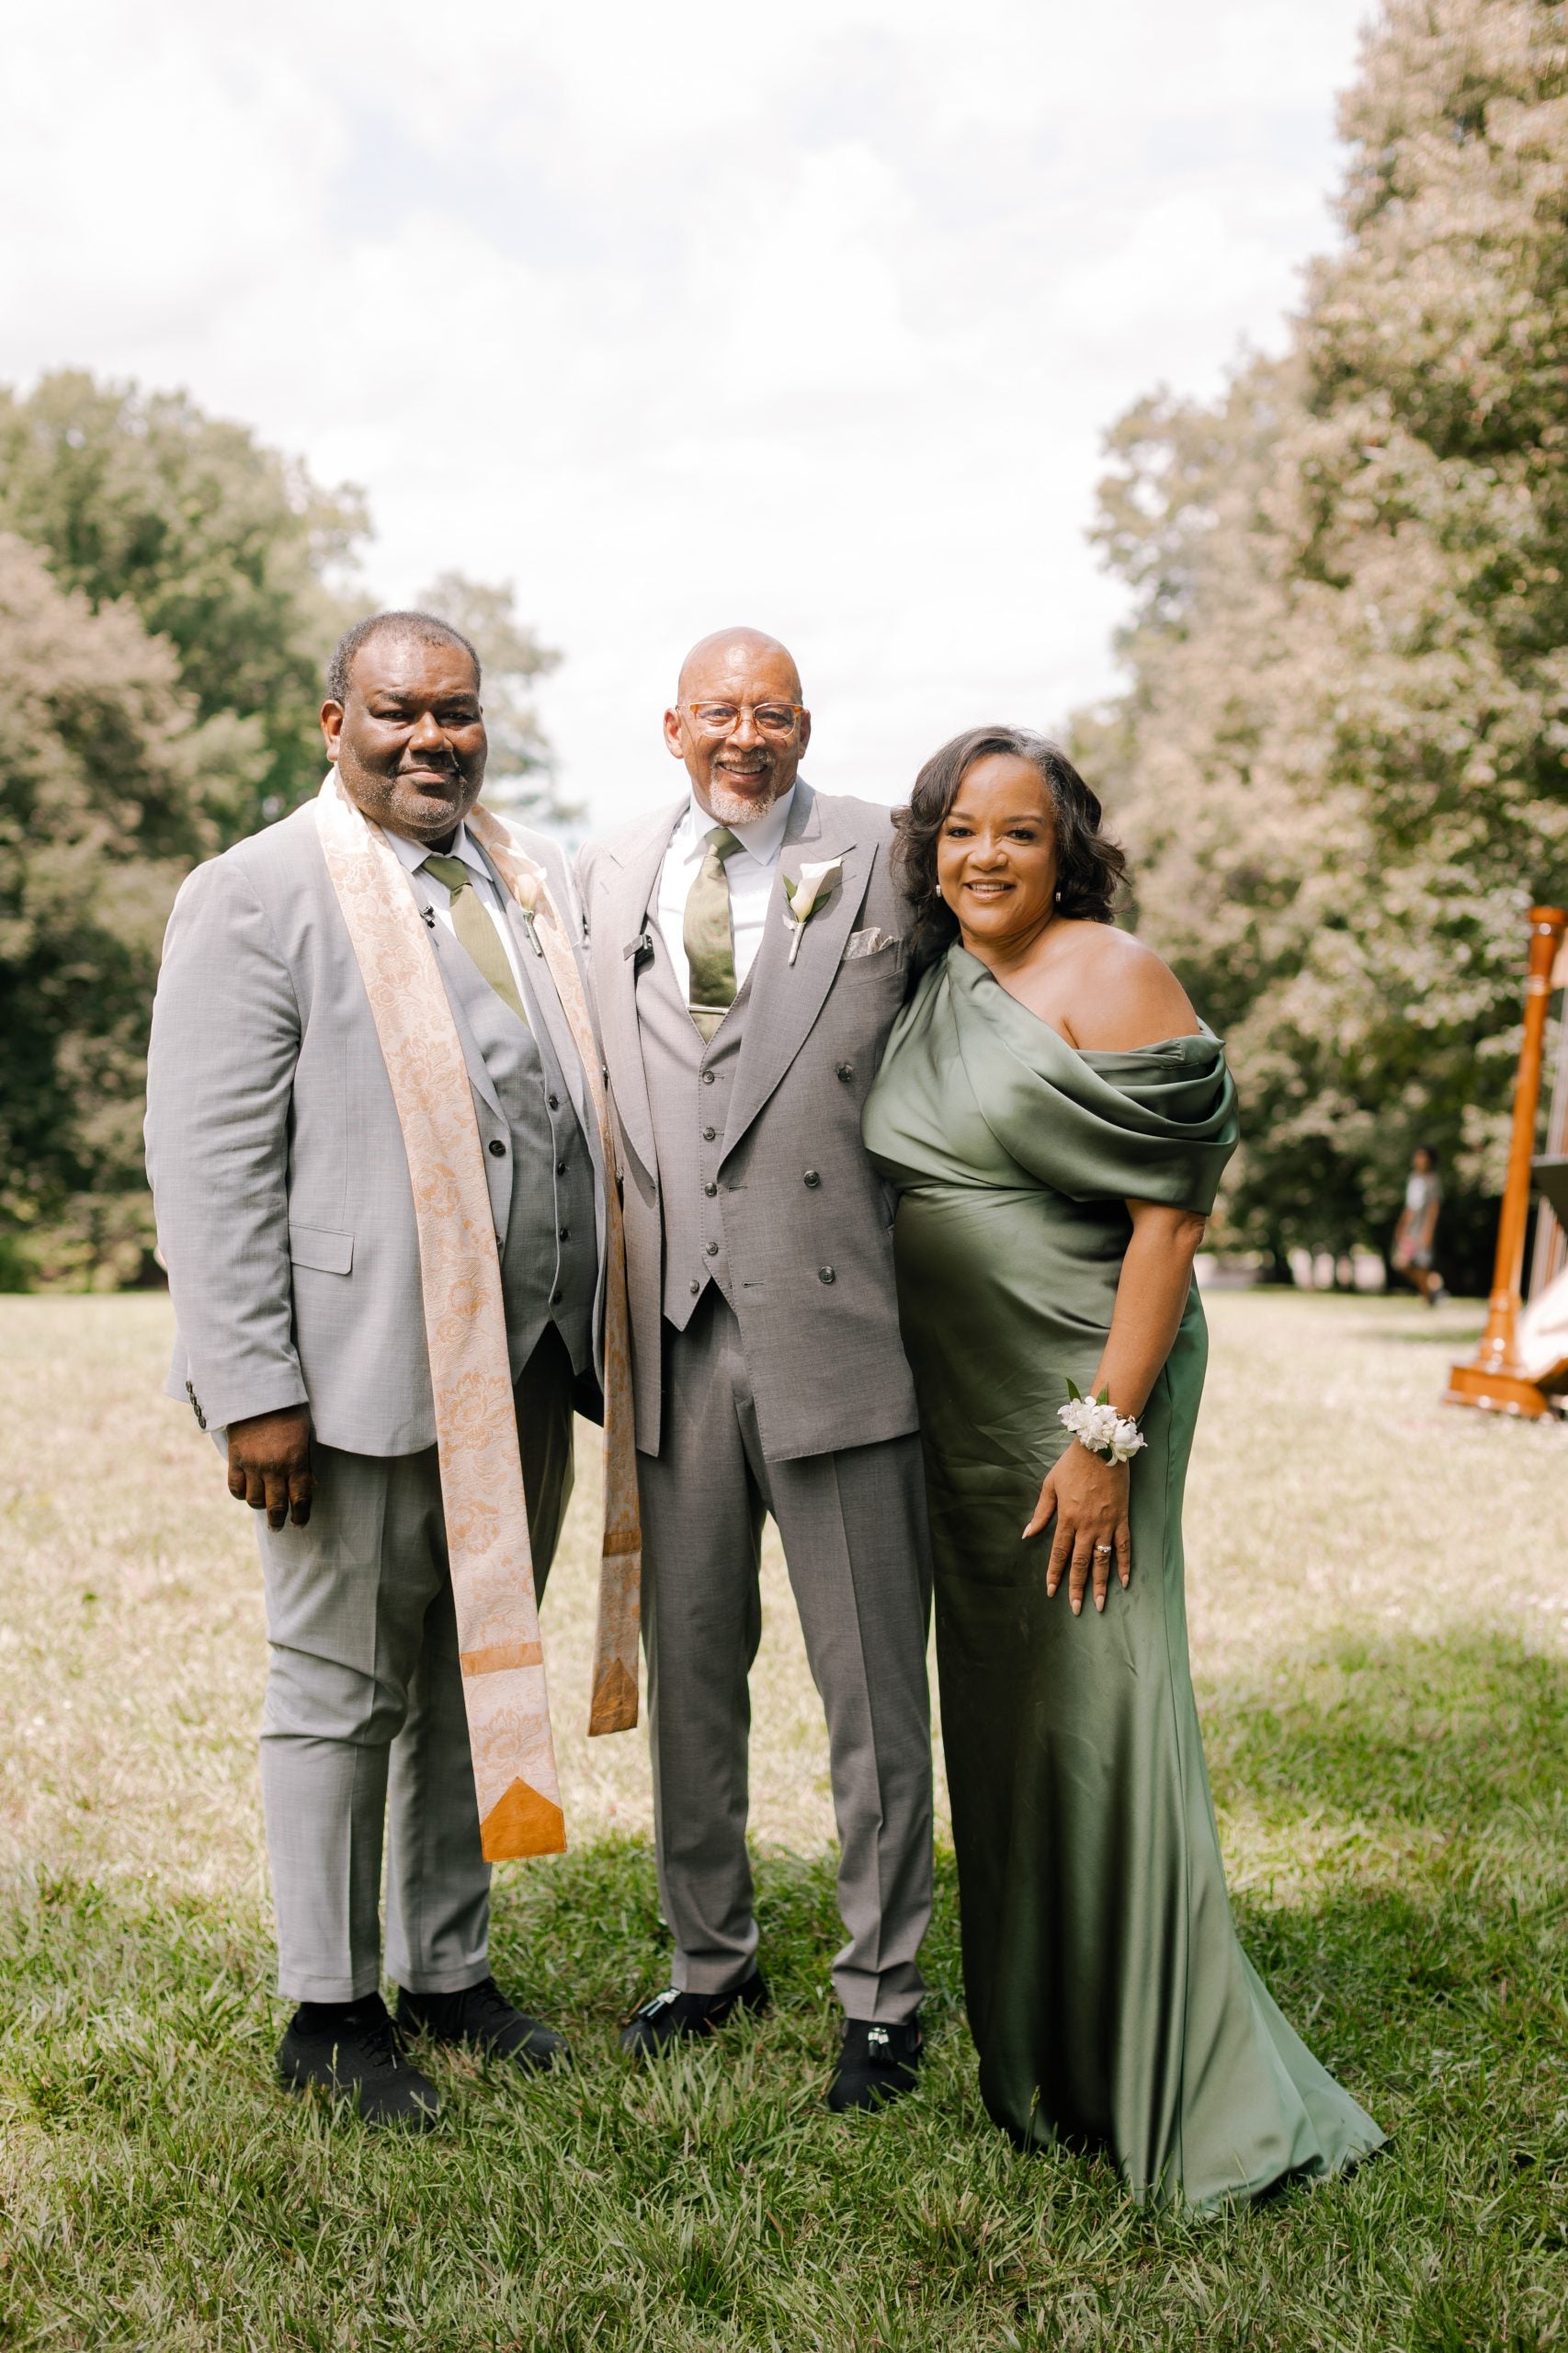 Bridal Bliss: Cindy And Keith's Dreamy North Carolina Nuptials Had Mountain Views — And Only Two Guests